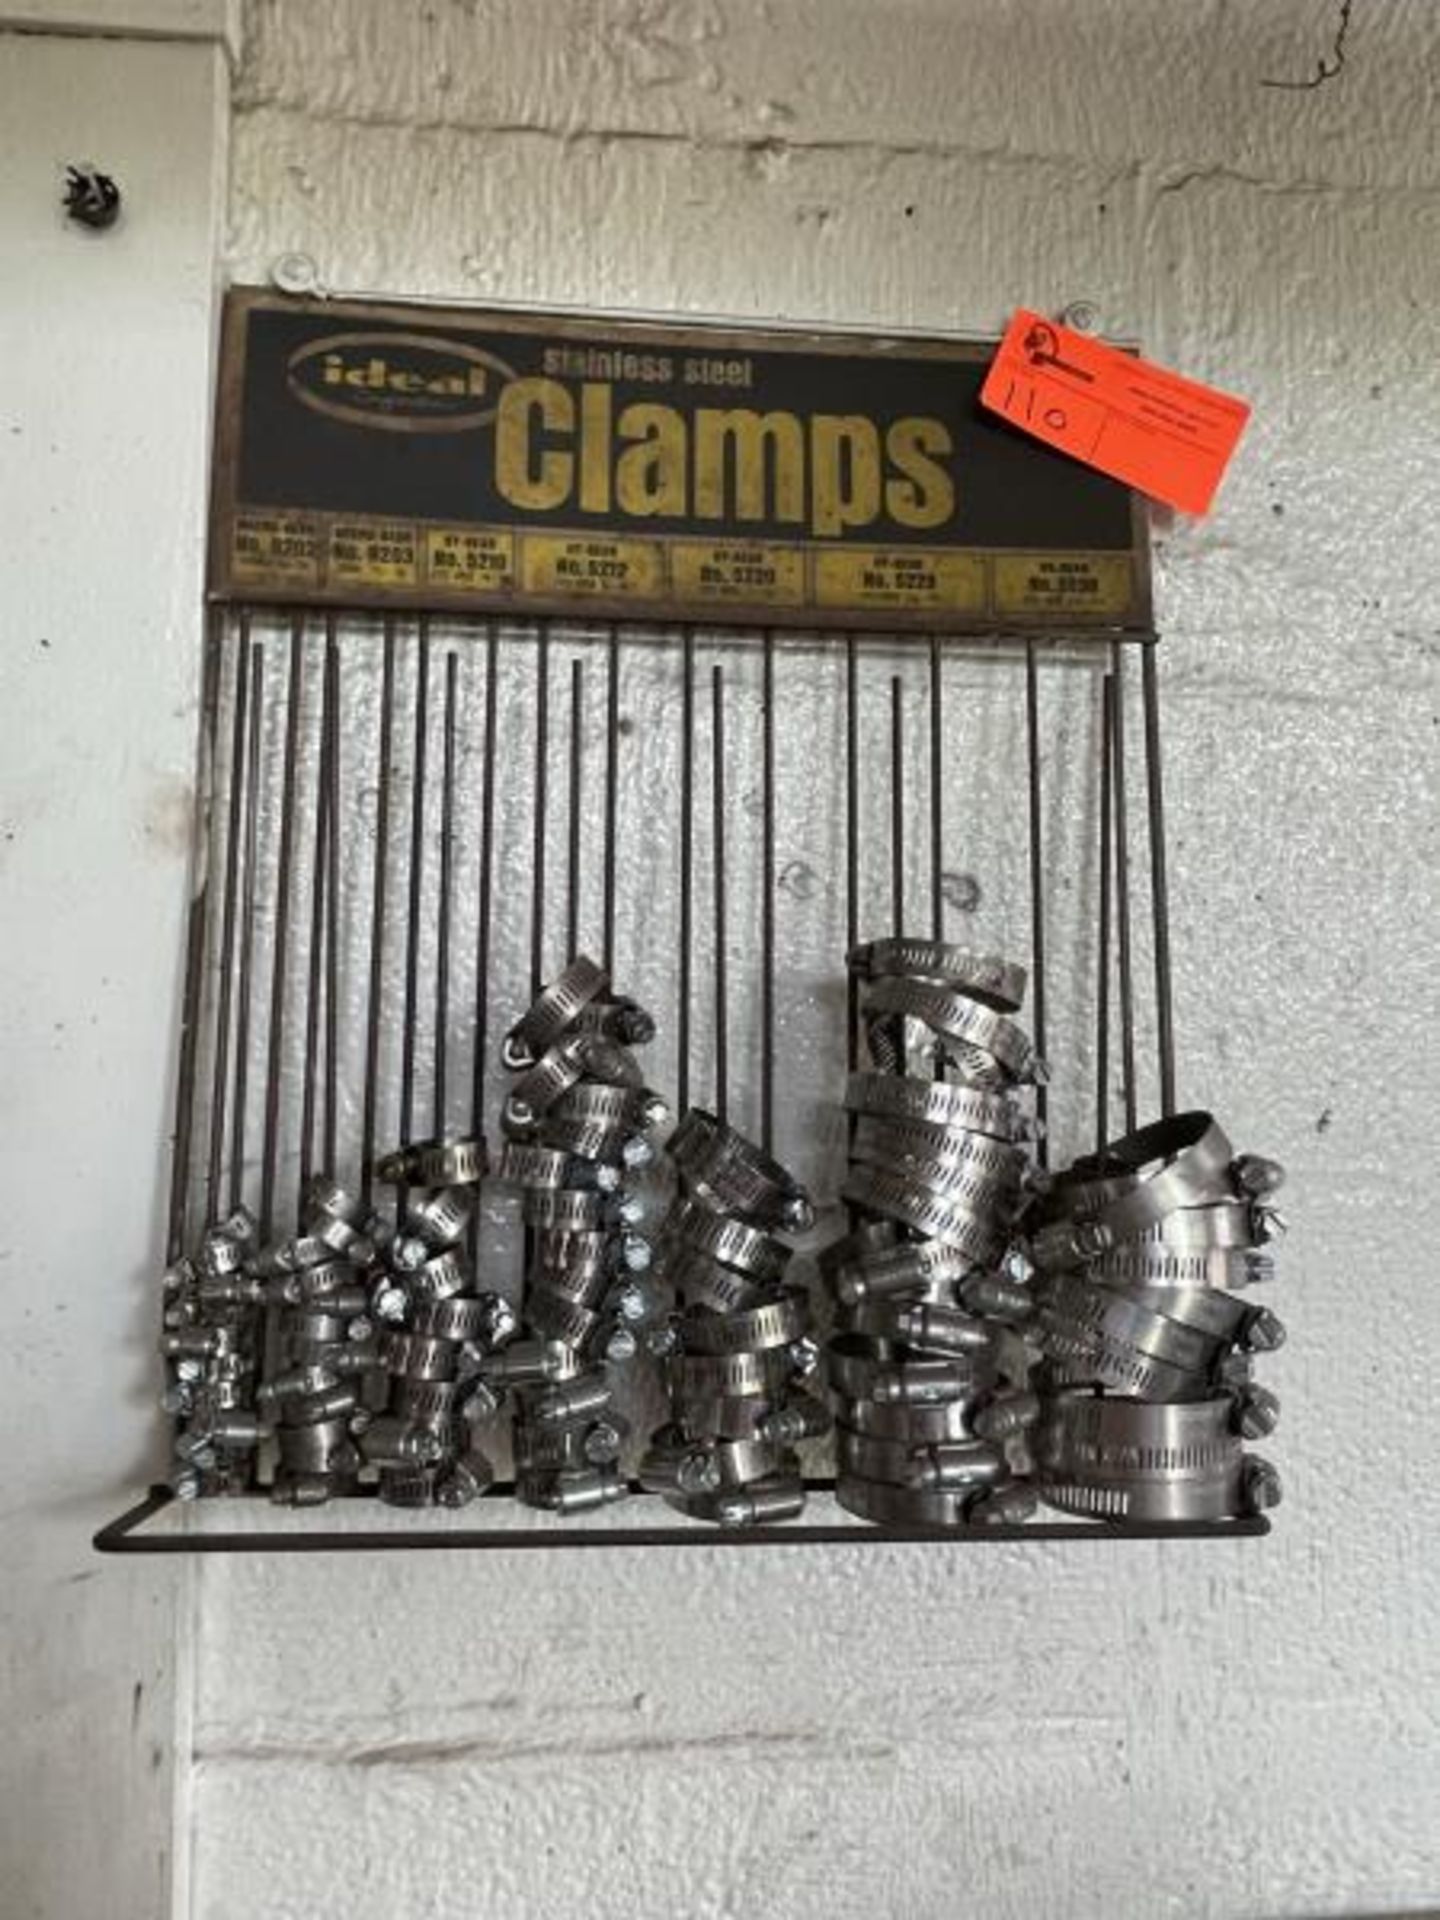 Ideal Wall Mount Rack with Clamps